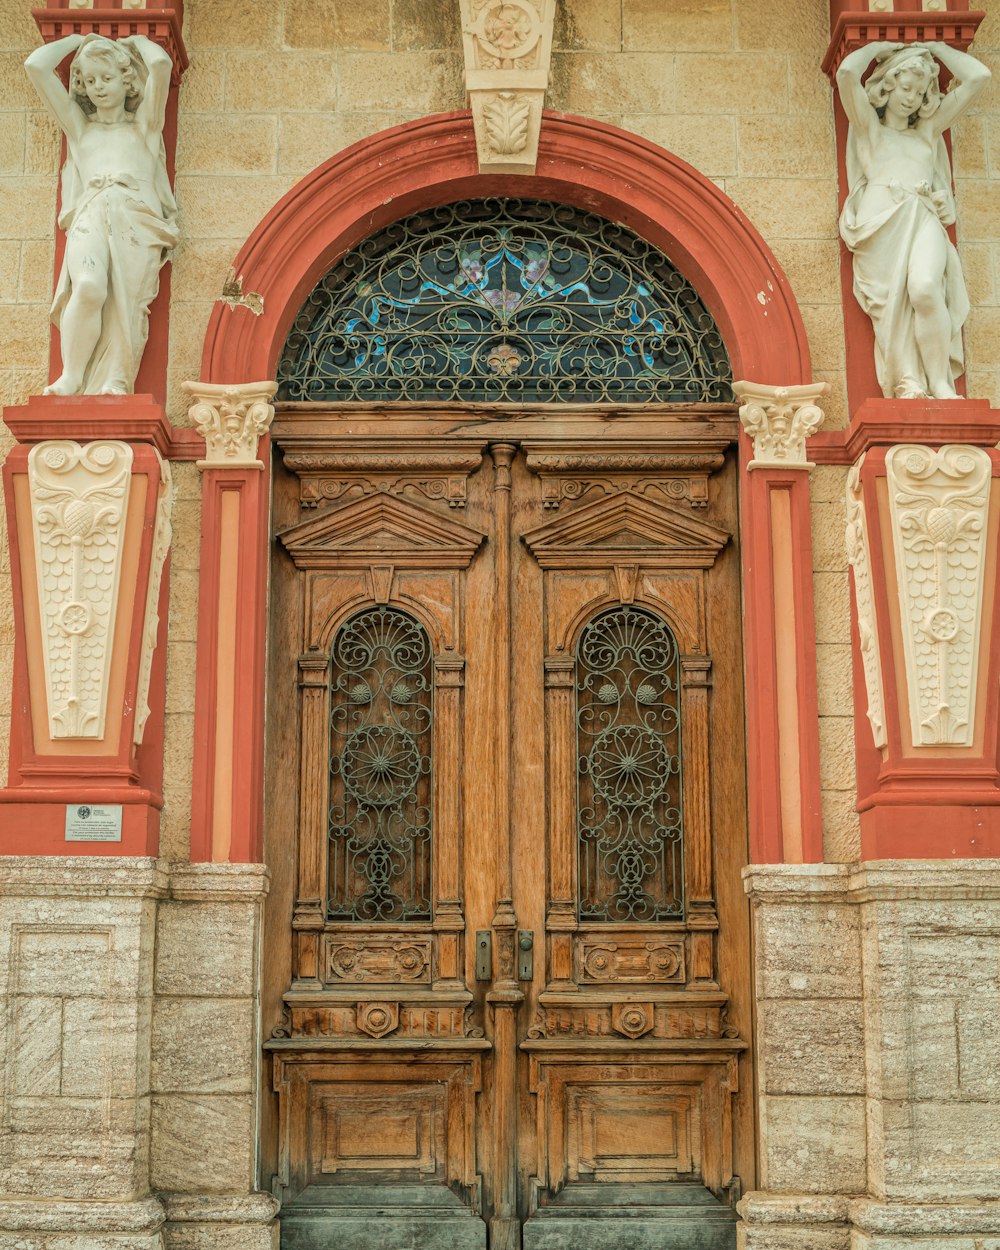 a large wooden door with statues above it